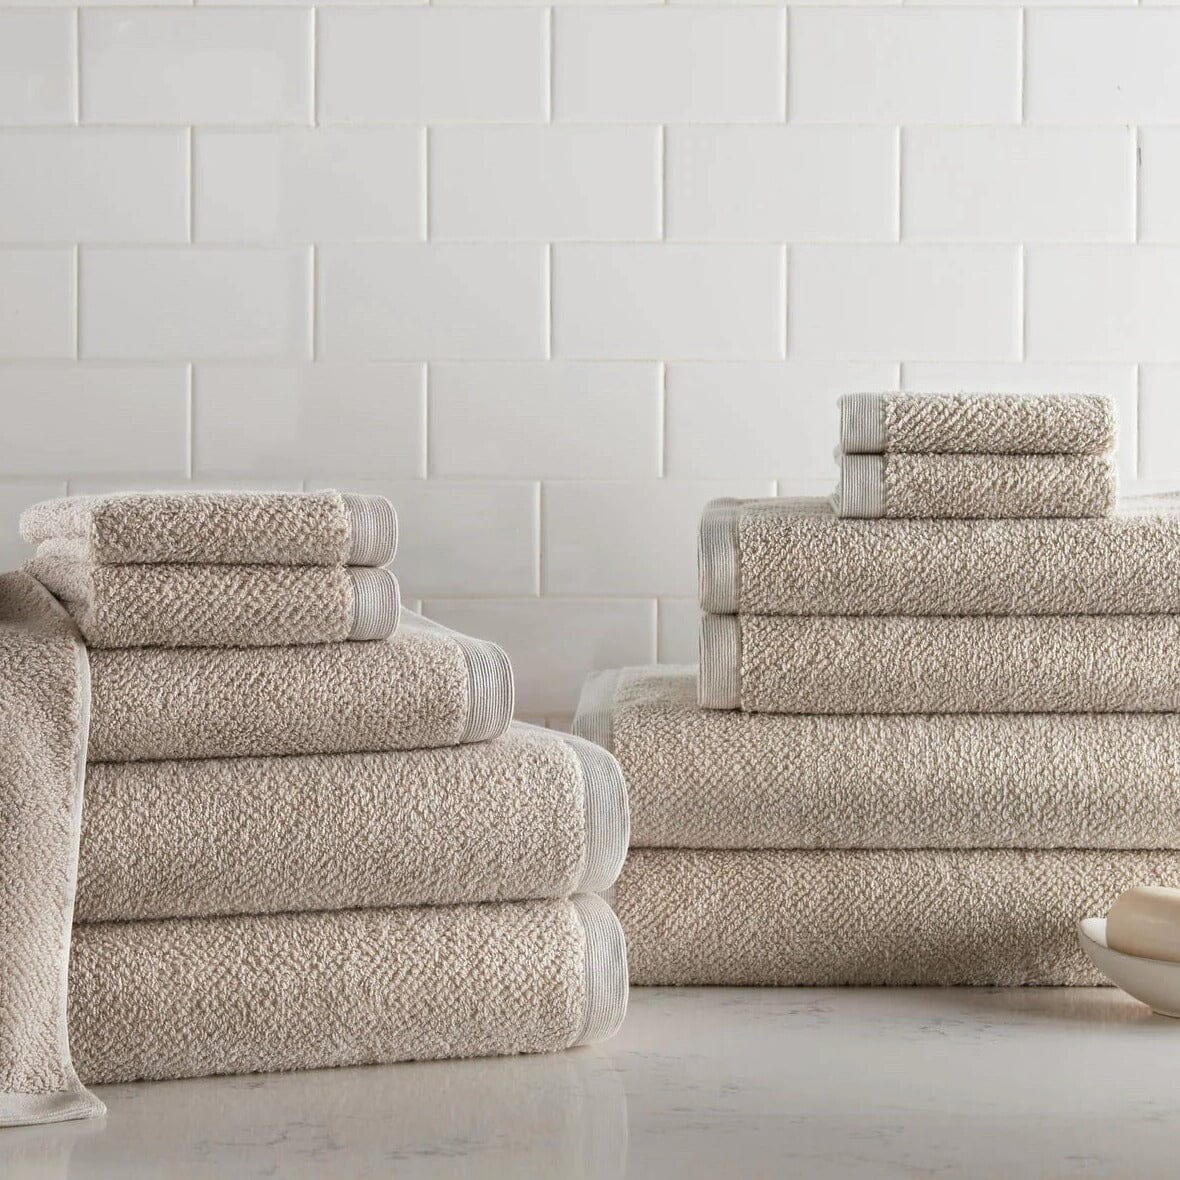 Peacock Alley Bath Towels | Jubilee Towels in White Cotton Terry